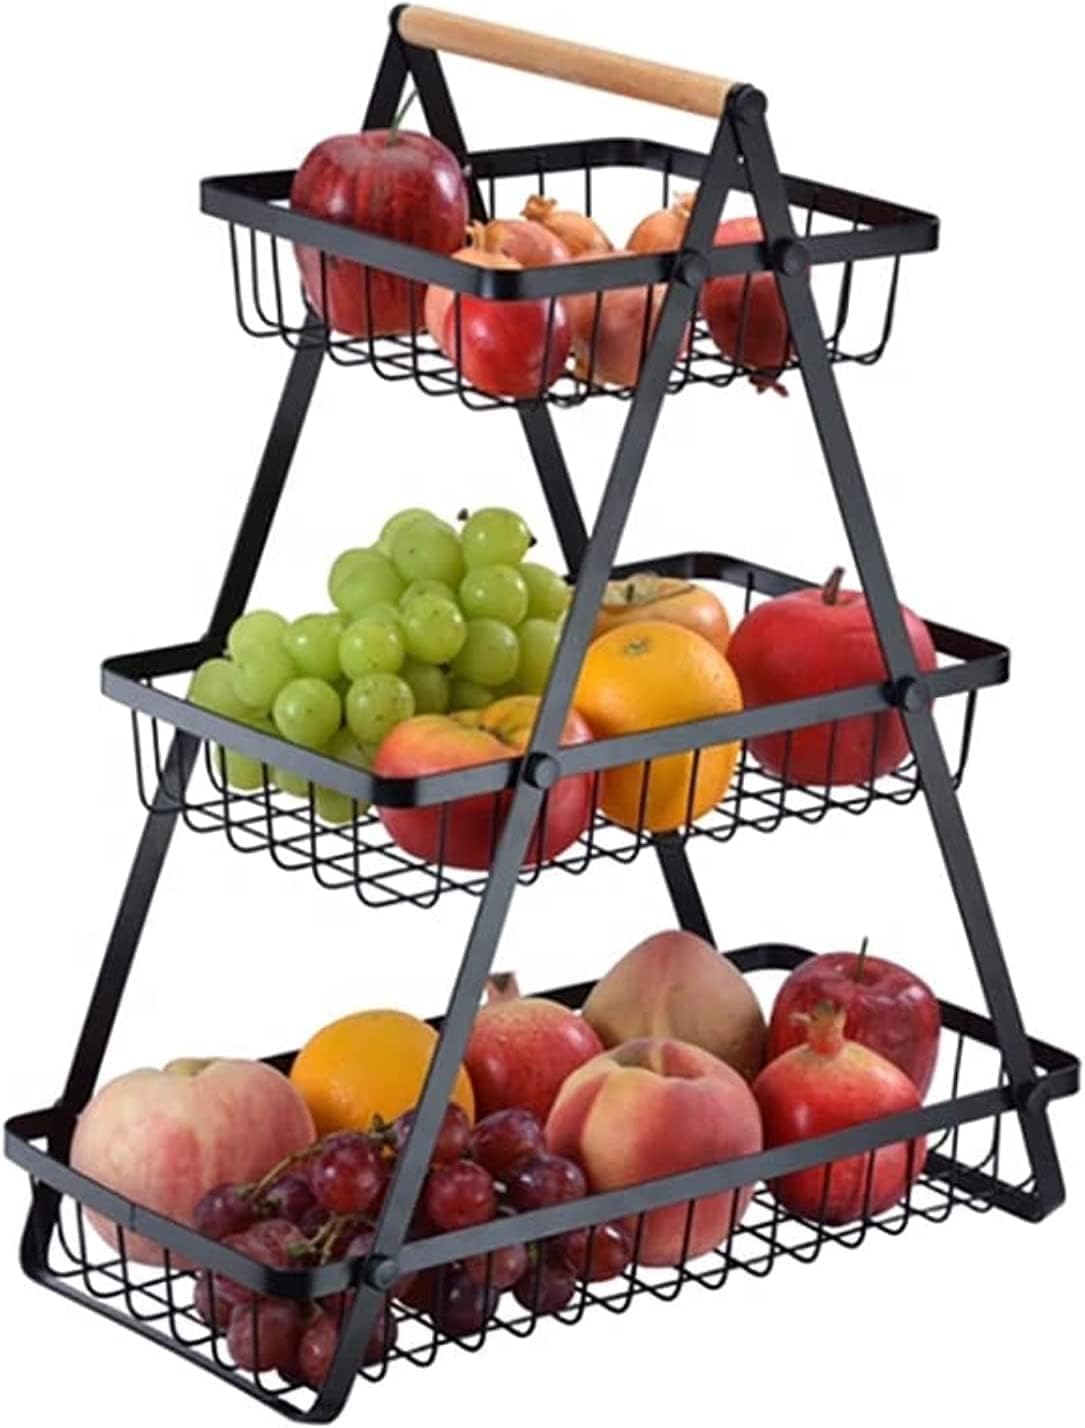 Three-Tier Fruit and Vegetable Basket